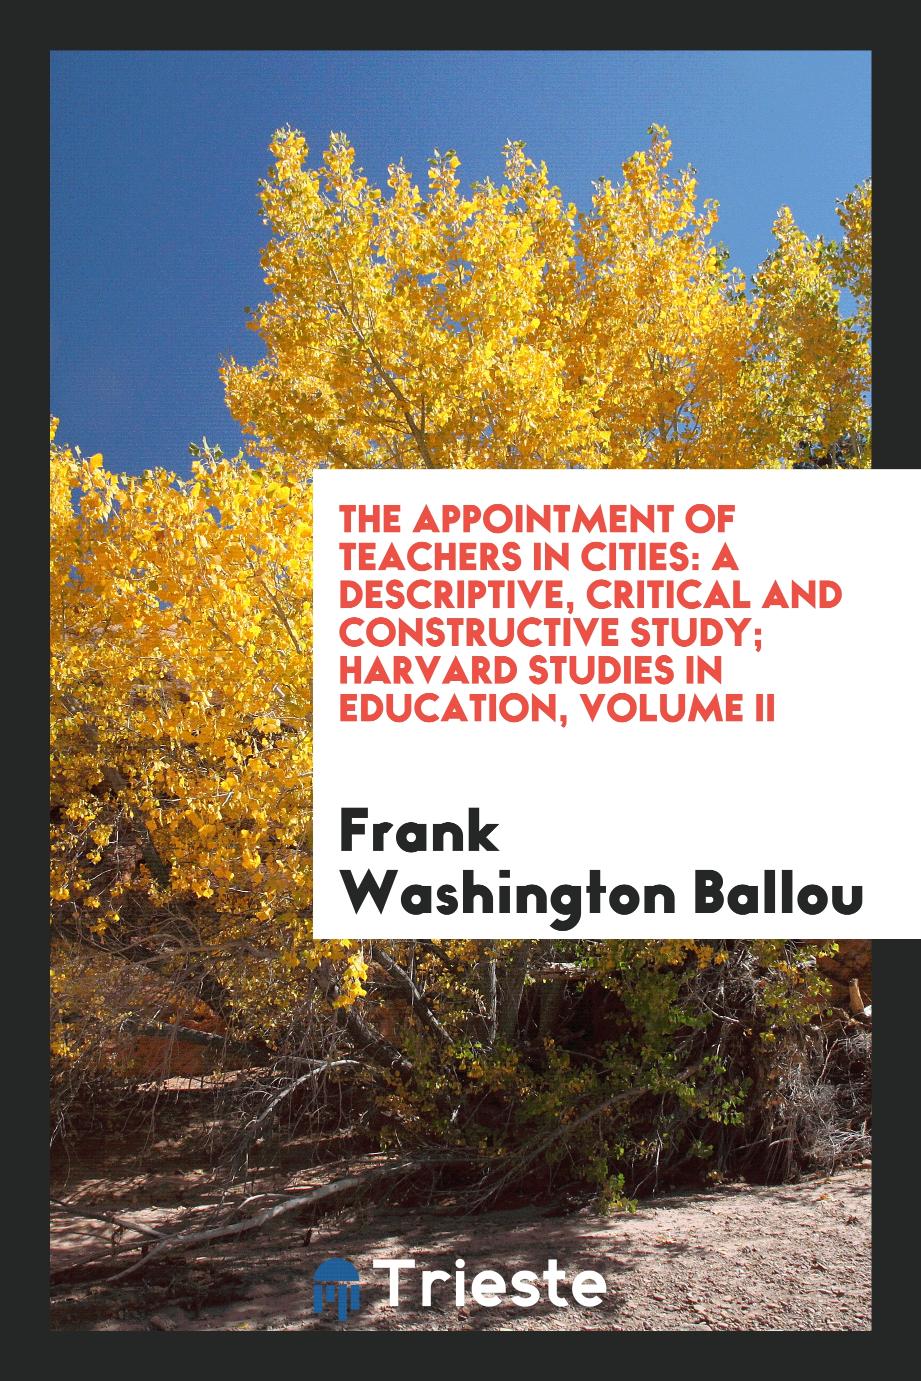 The Appointment of Teachers in Cities: A Descriptive, Critical and Constructive Study; Harvard Studies in Education, Volume II